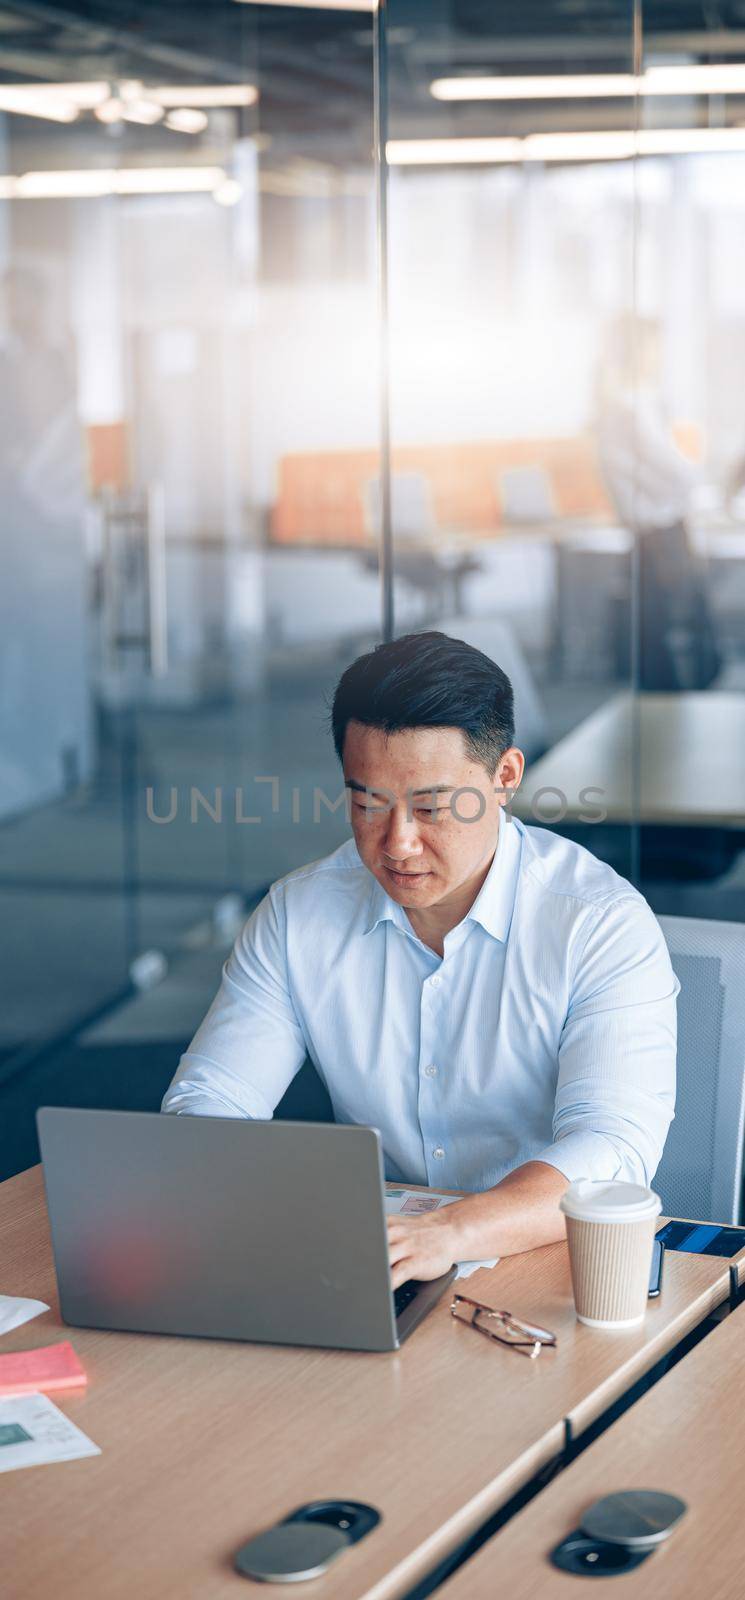 Focused asian businessman working on laptop at her workplace with colleagues in the background.